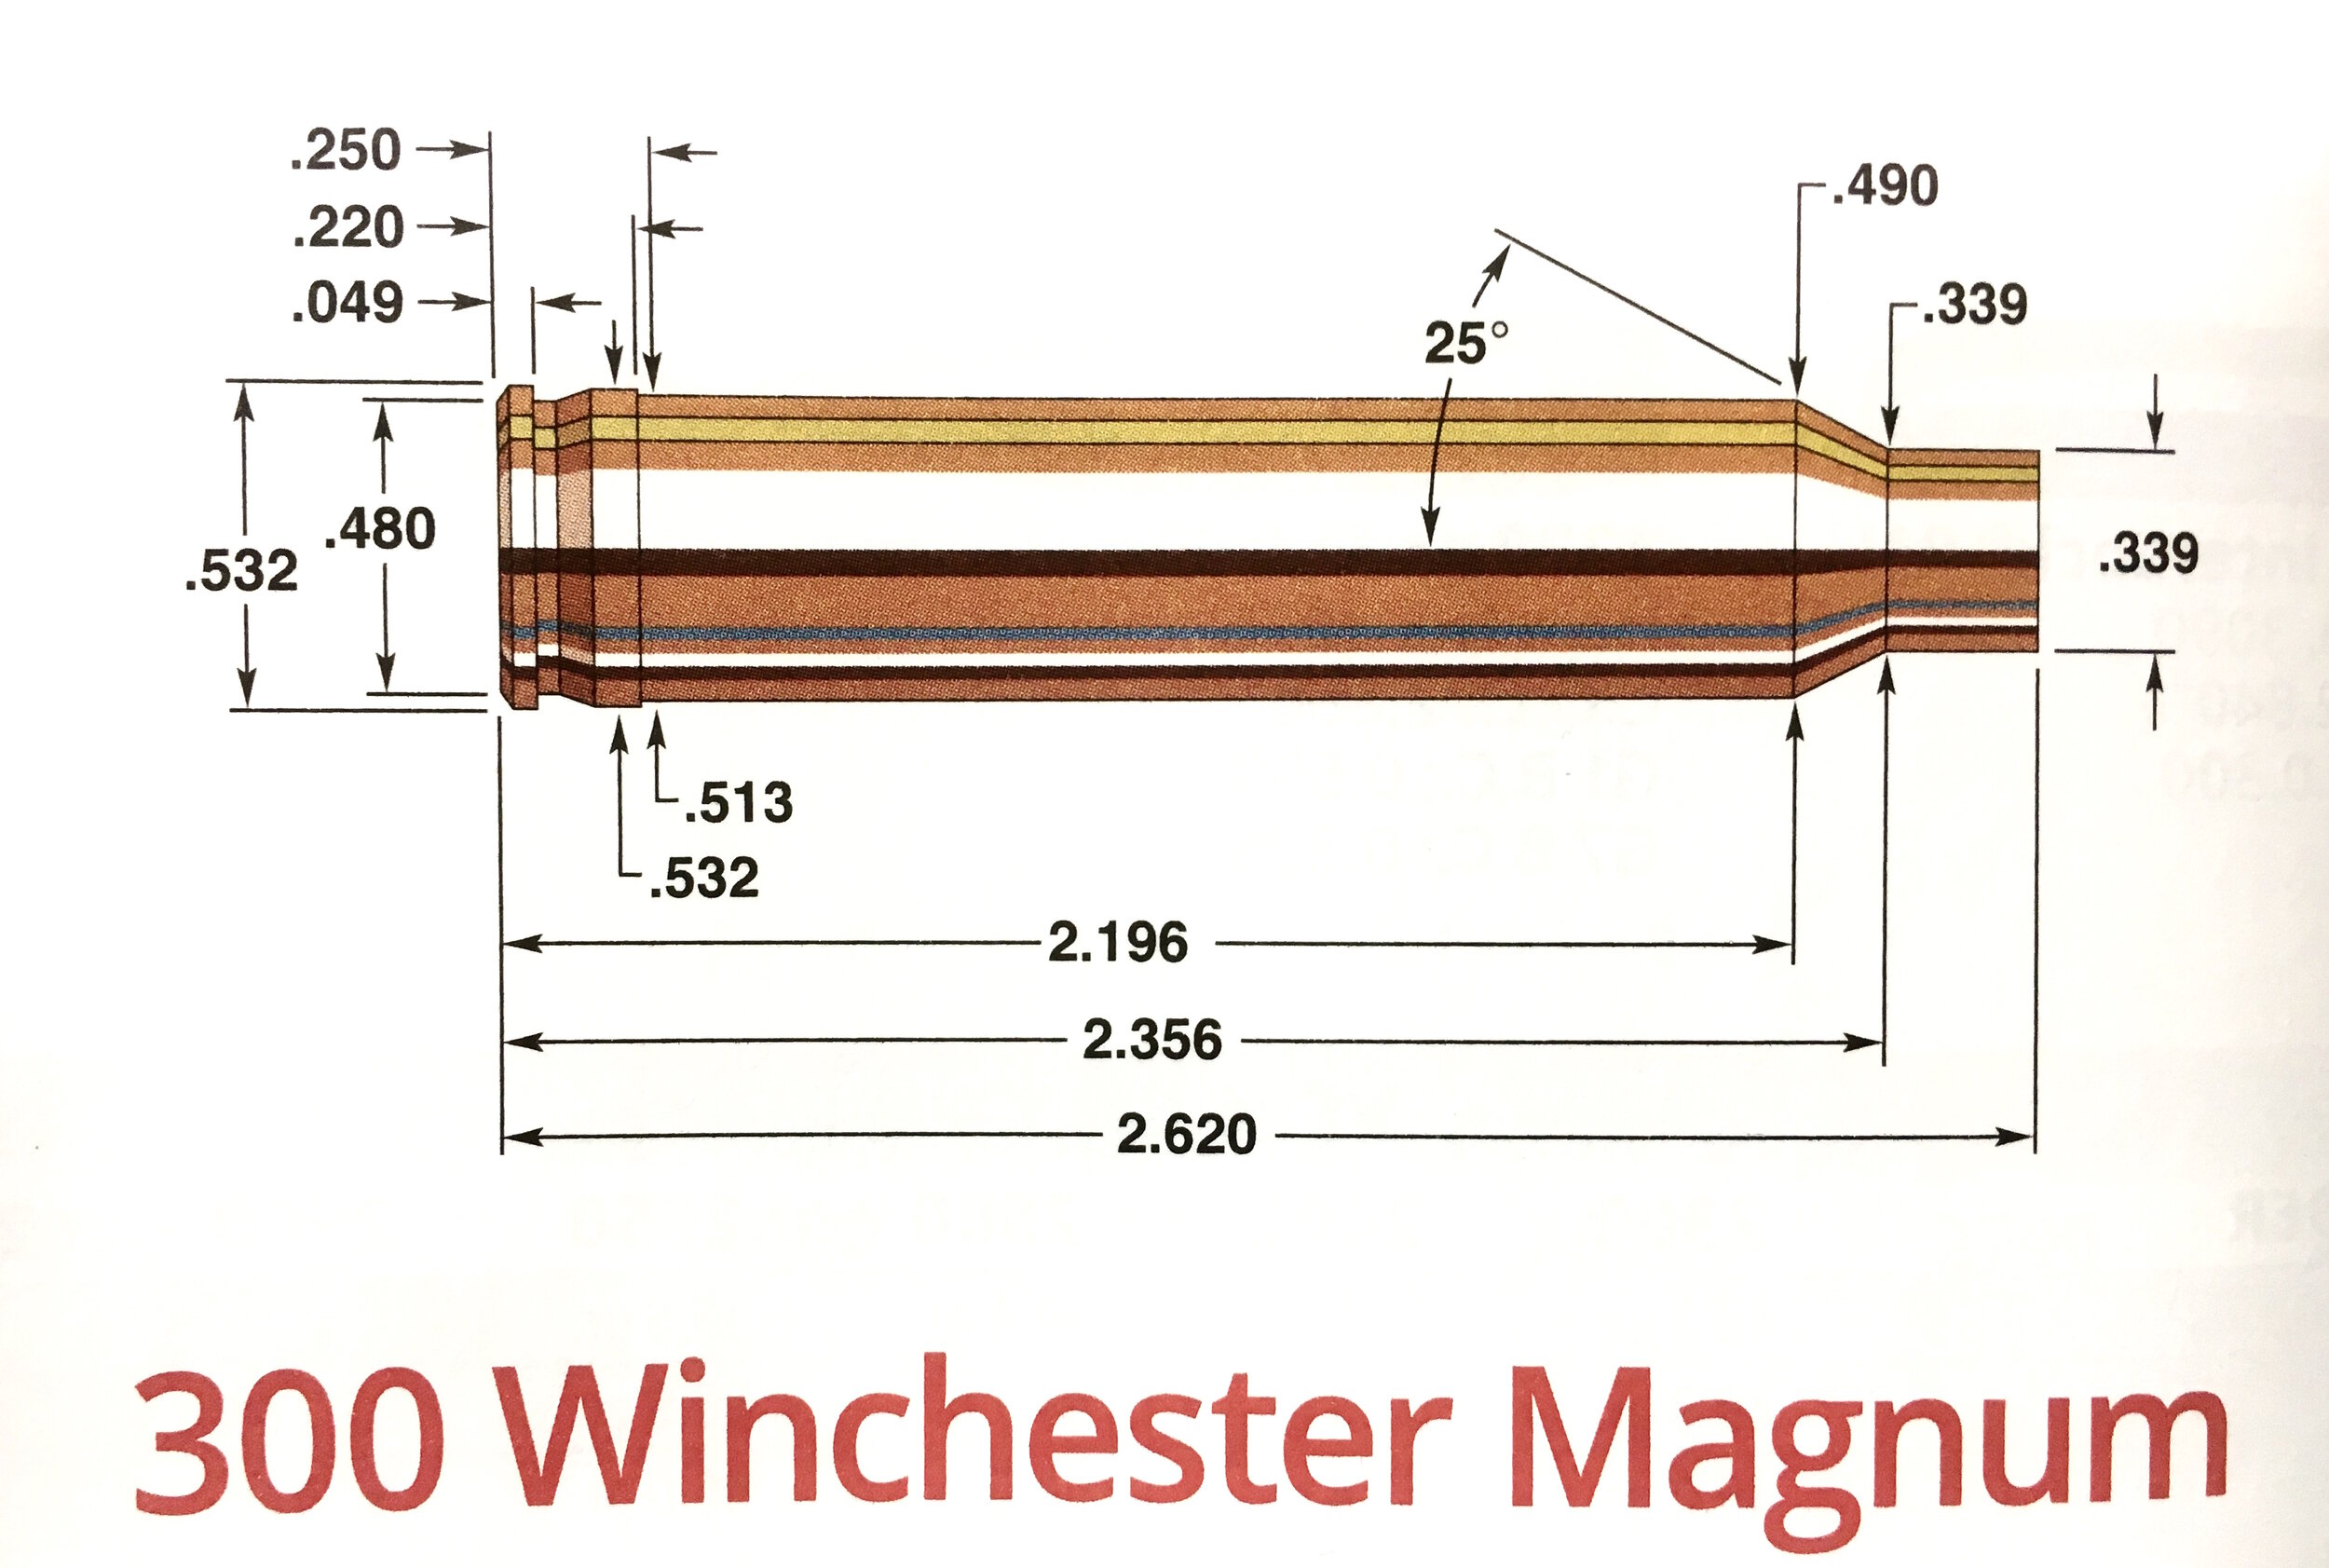 This image shows dimension of the 300 Win Mag cartridge. 